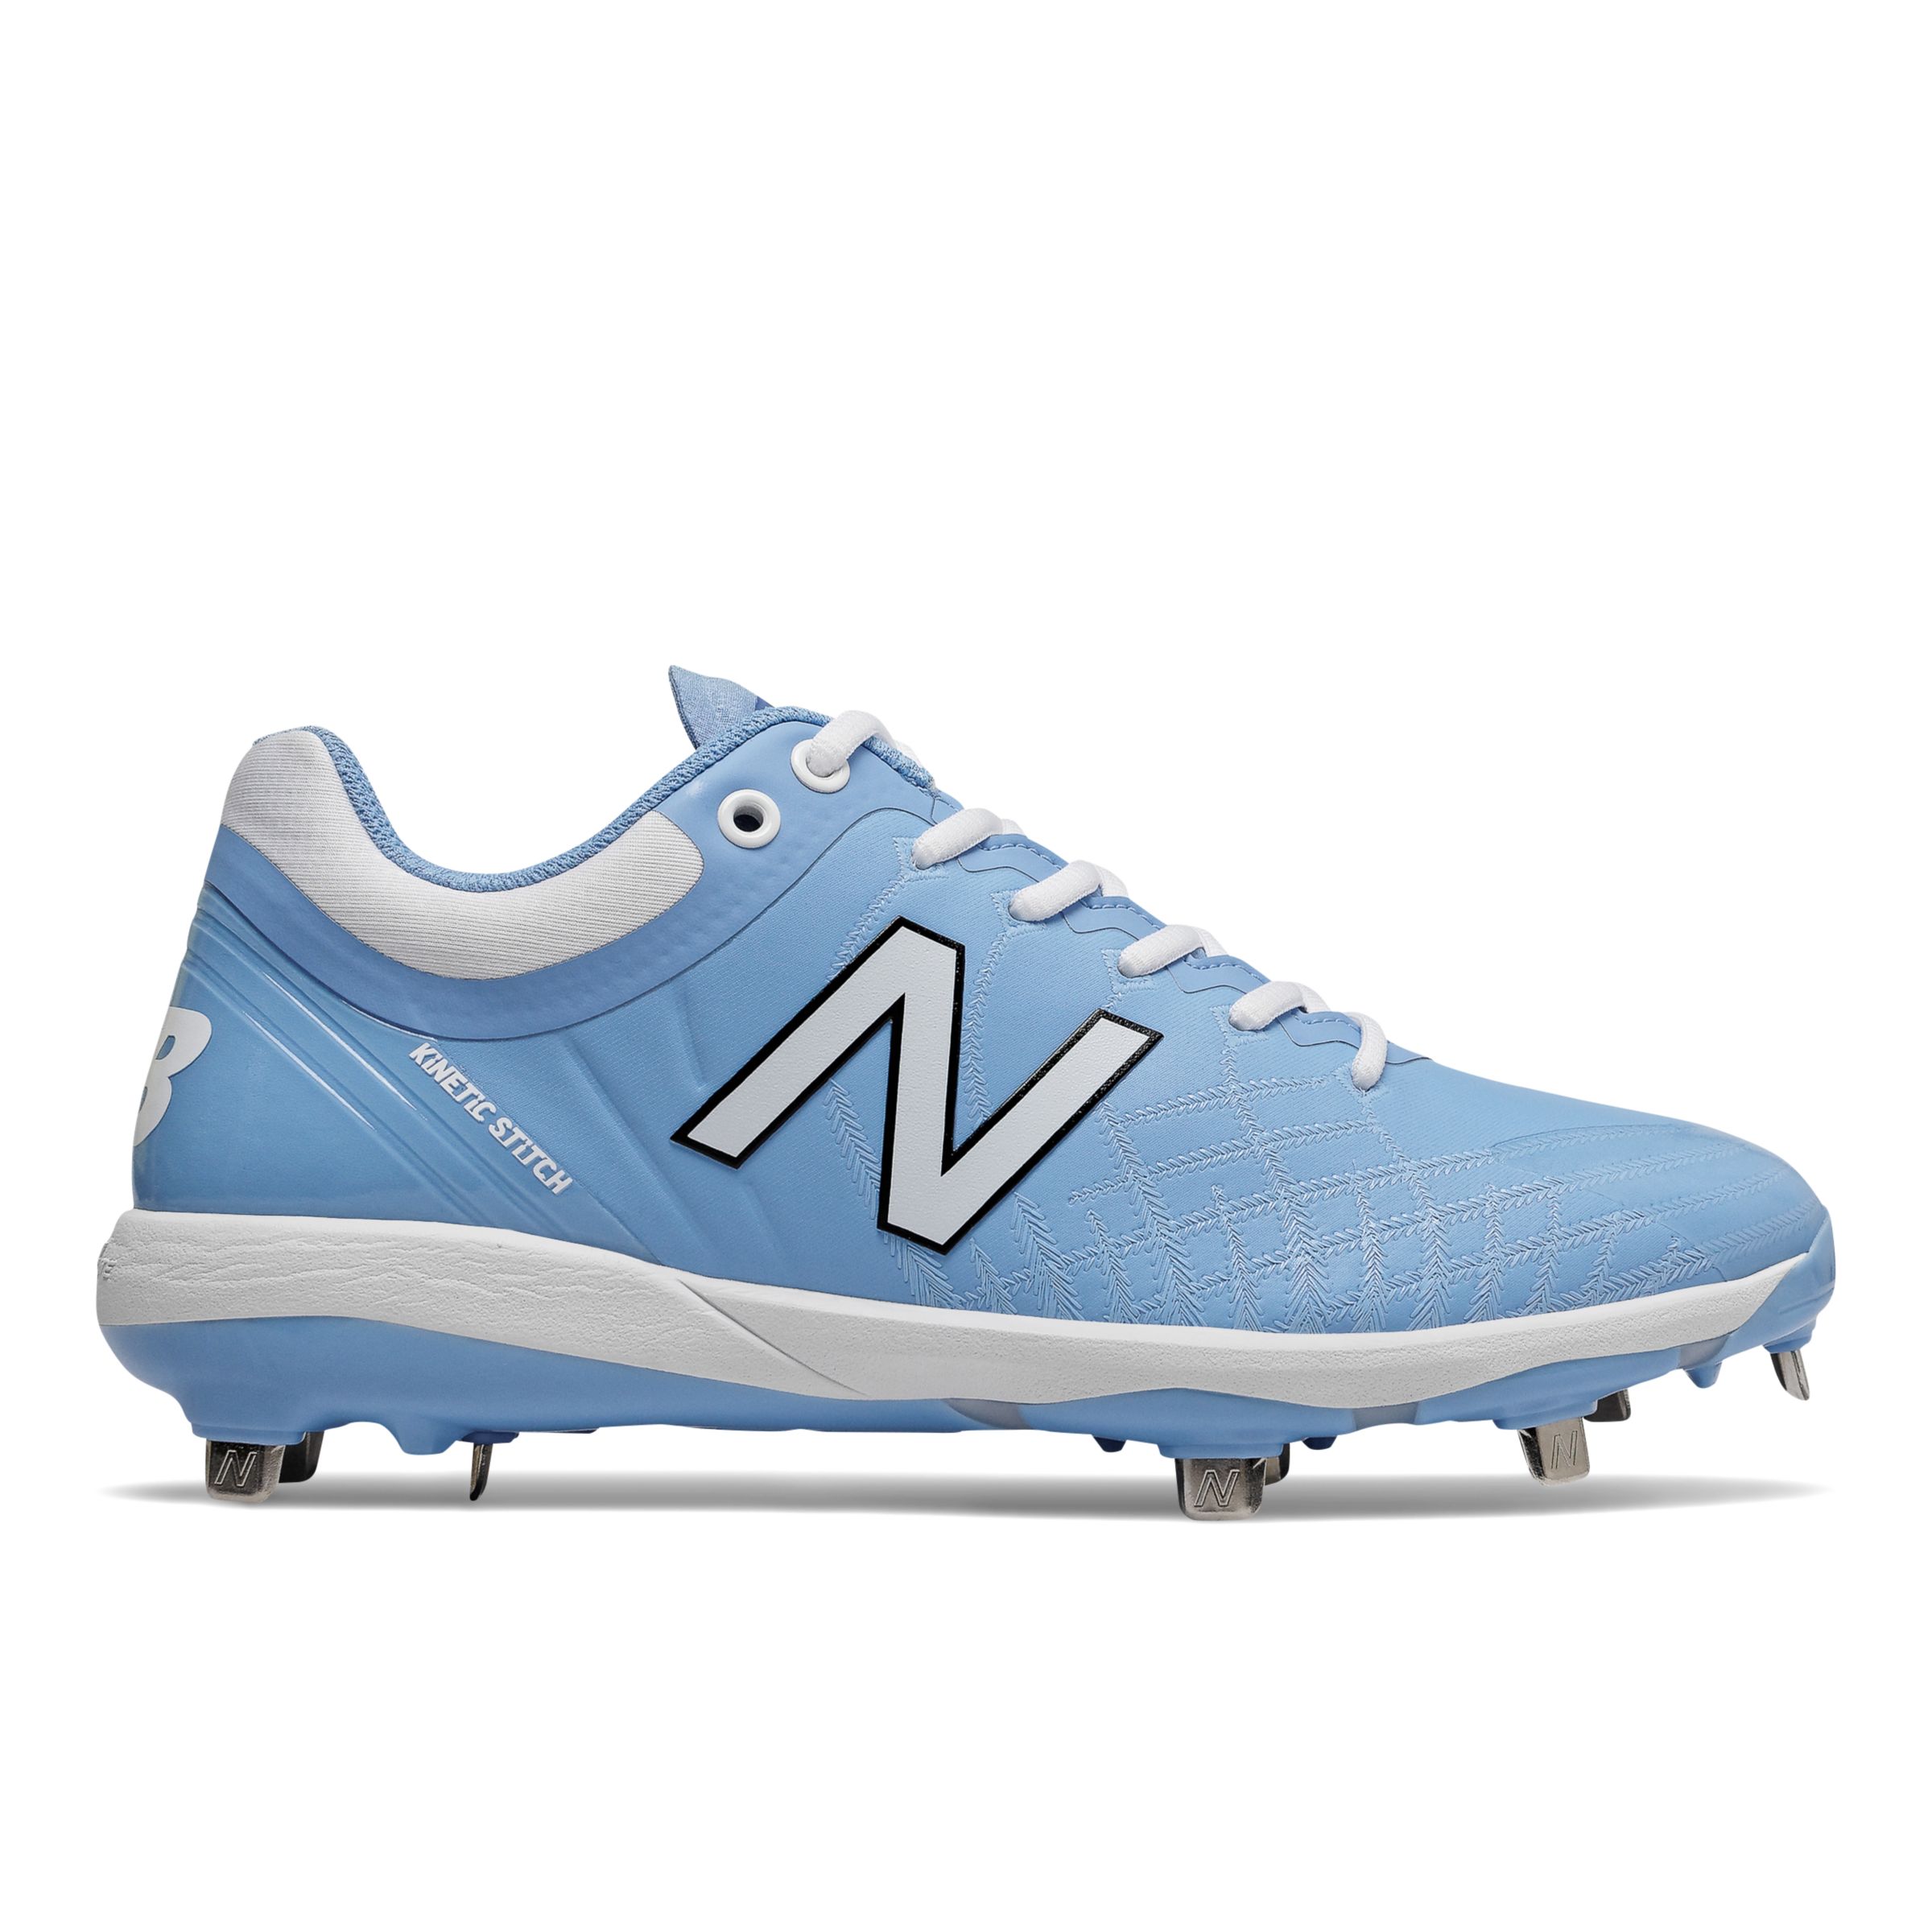 new balance l4040v4 all star game men's low metal cleats